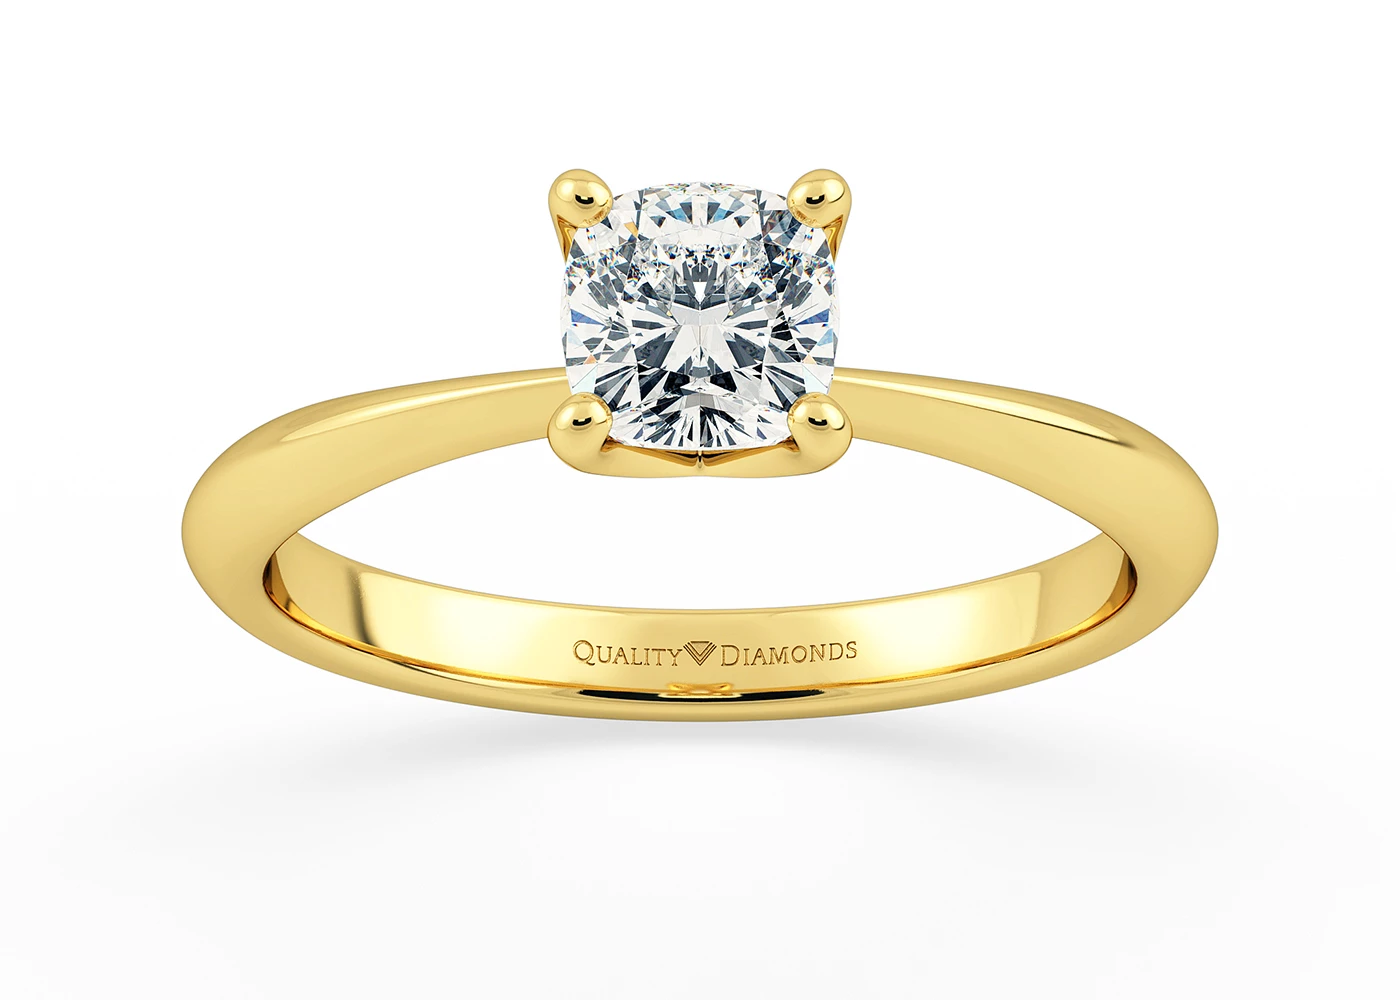 One Carat Cushion Solitaire Diamond Engagement Ring in 18K Yellow Gold